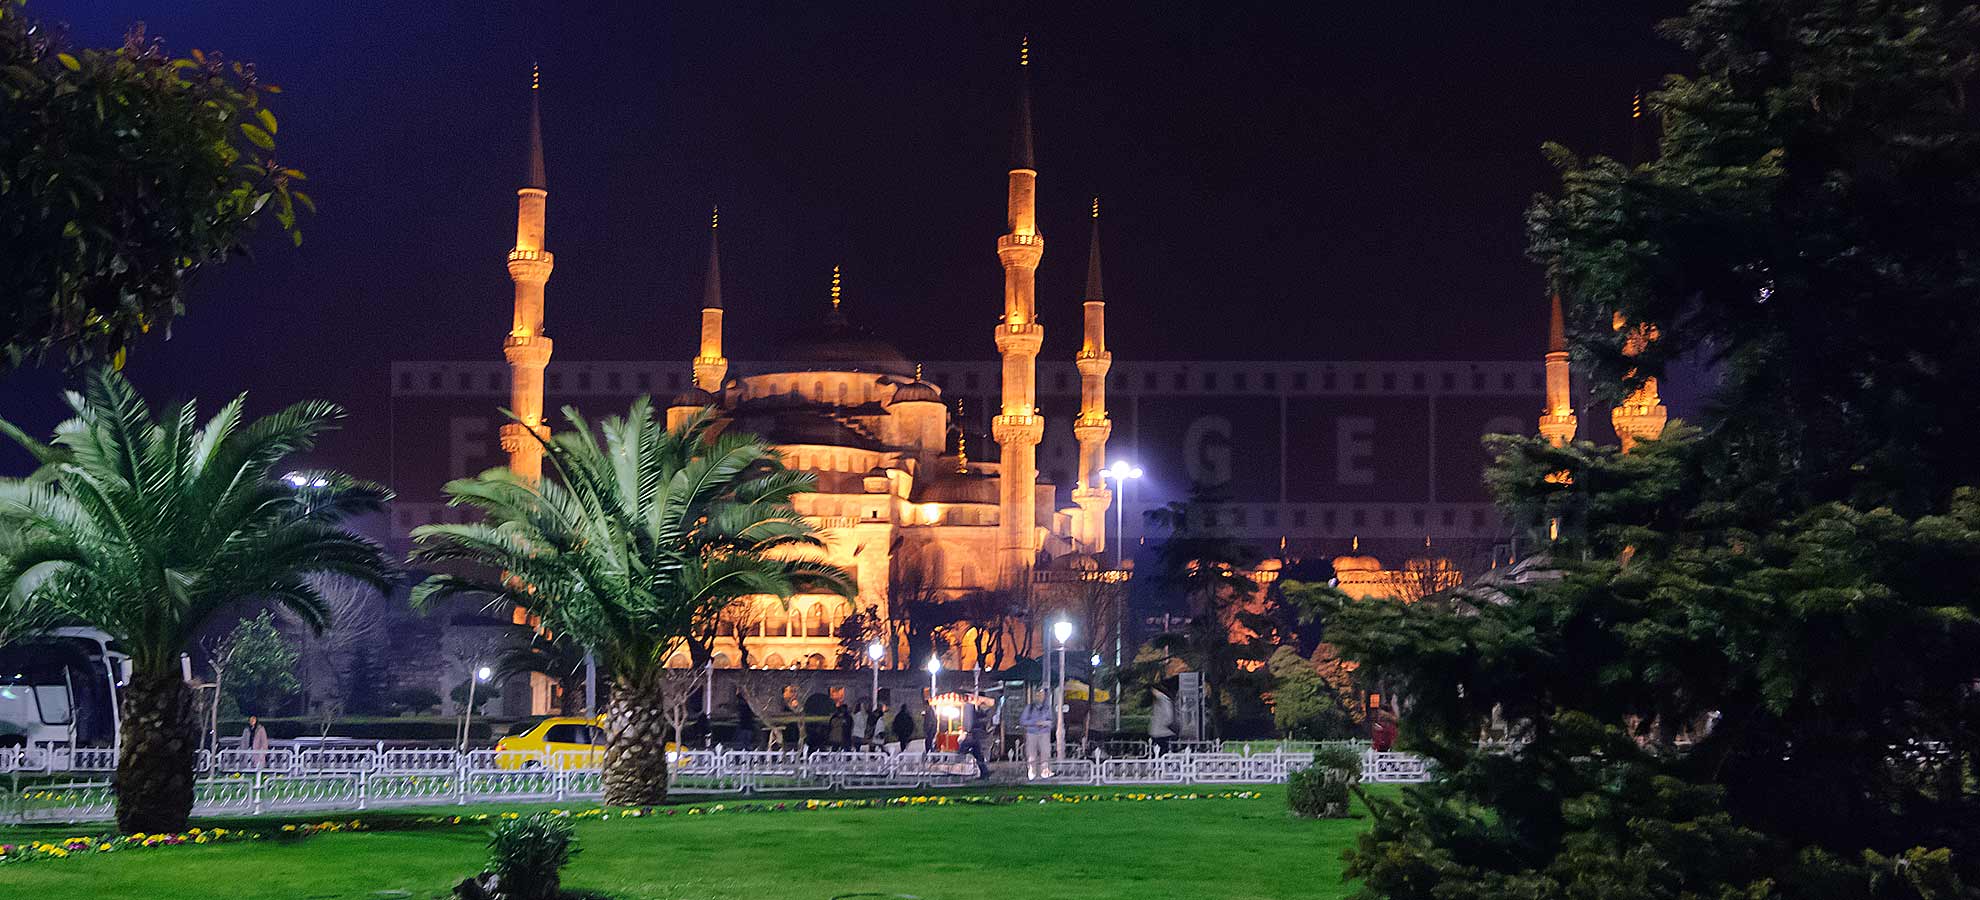 Blue Mosque Isanbul lit up at night